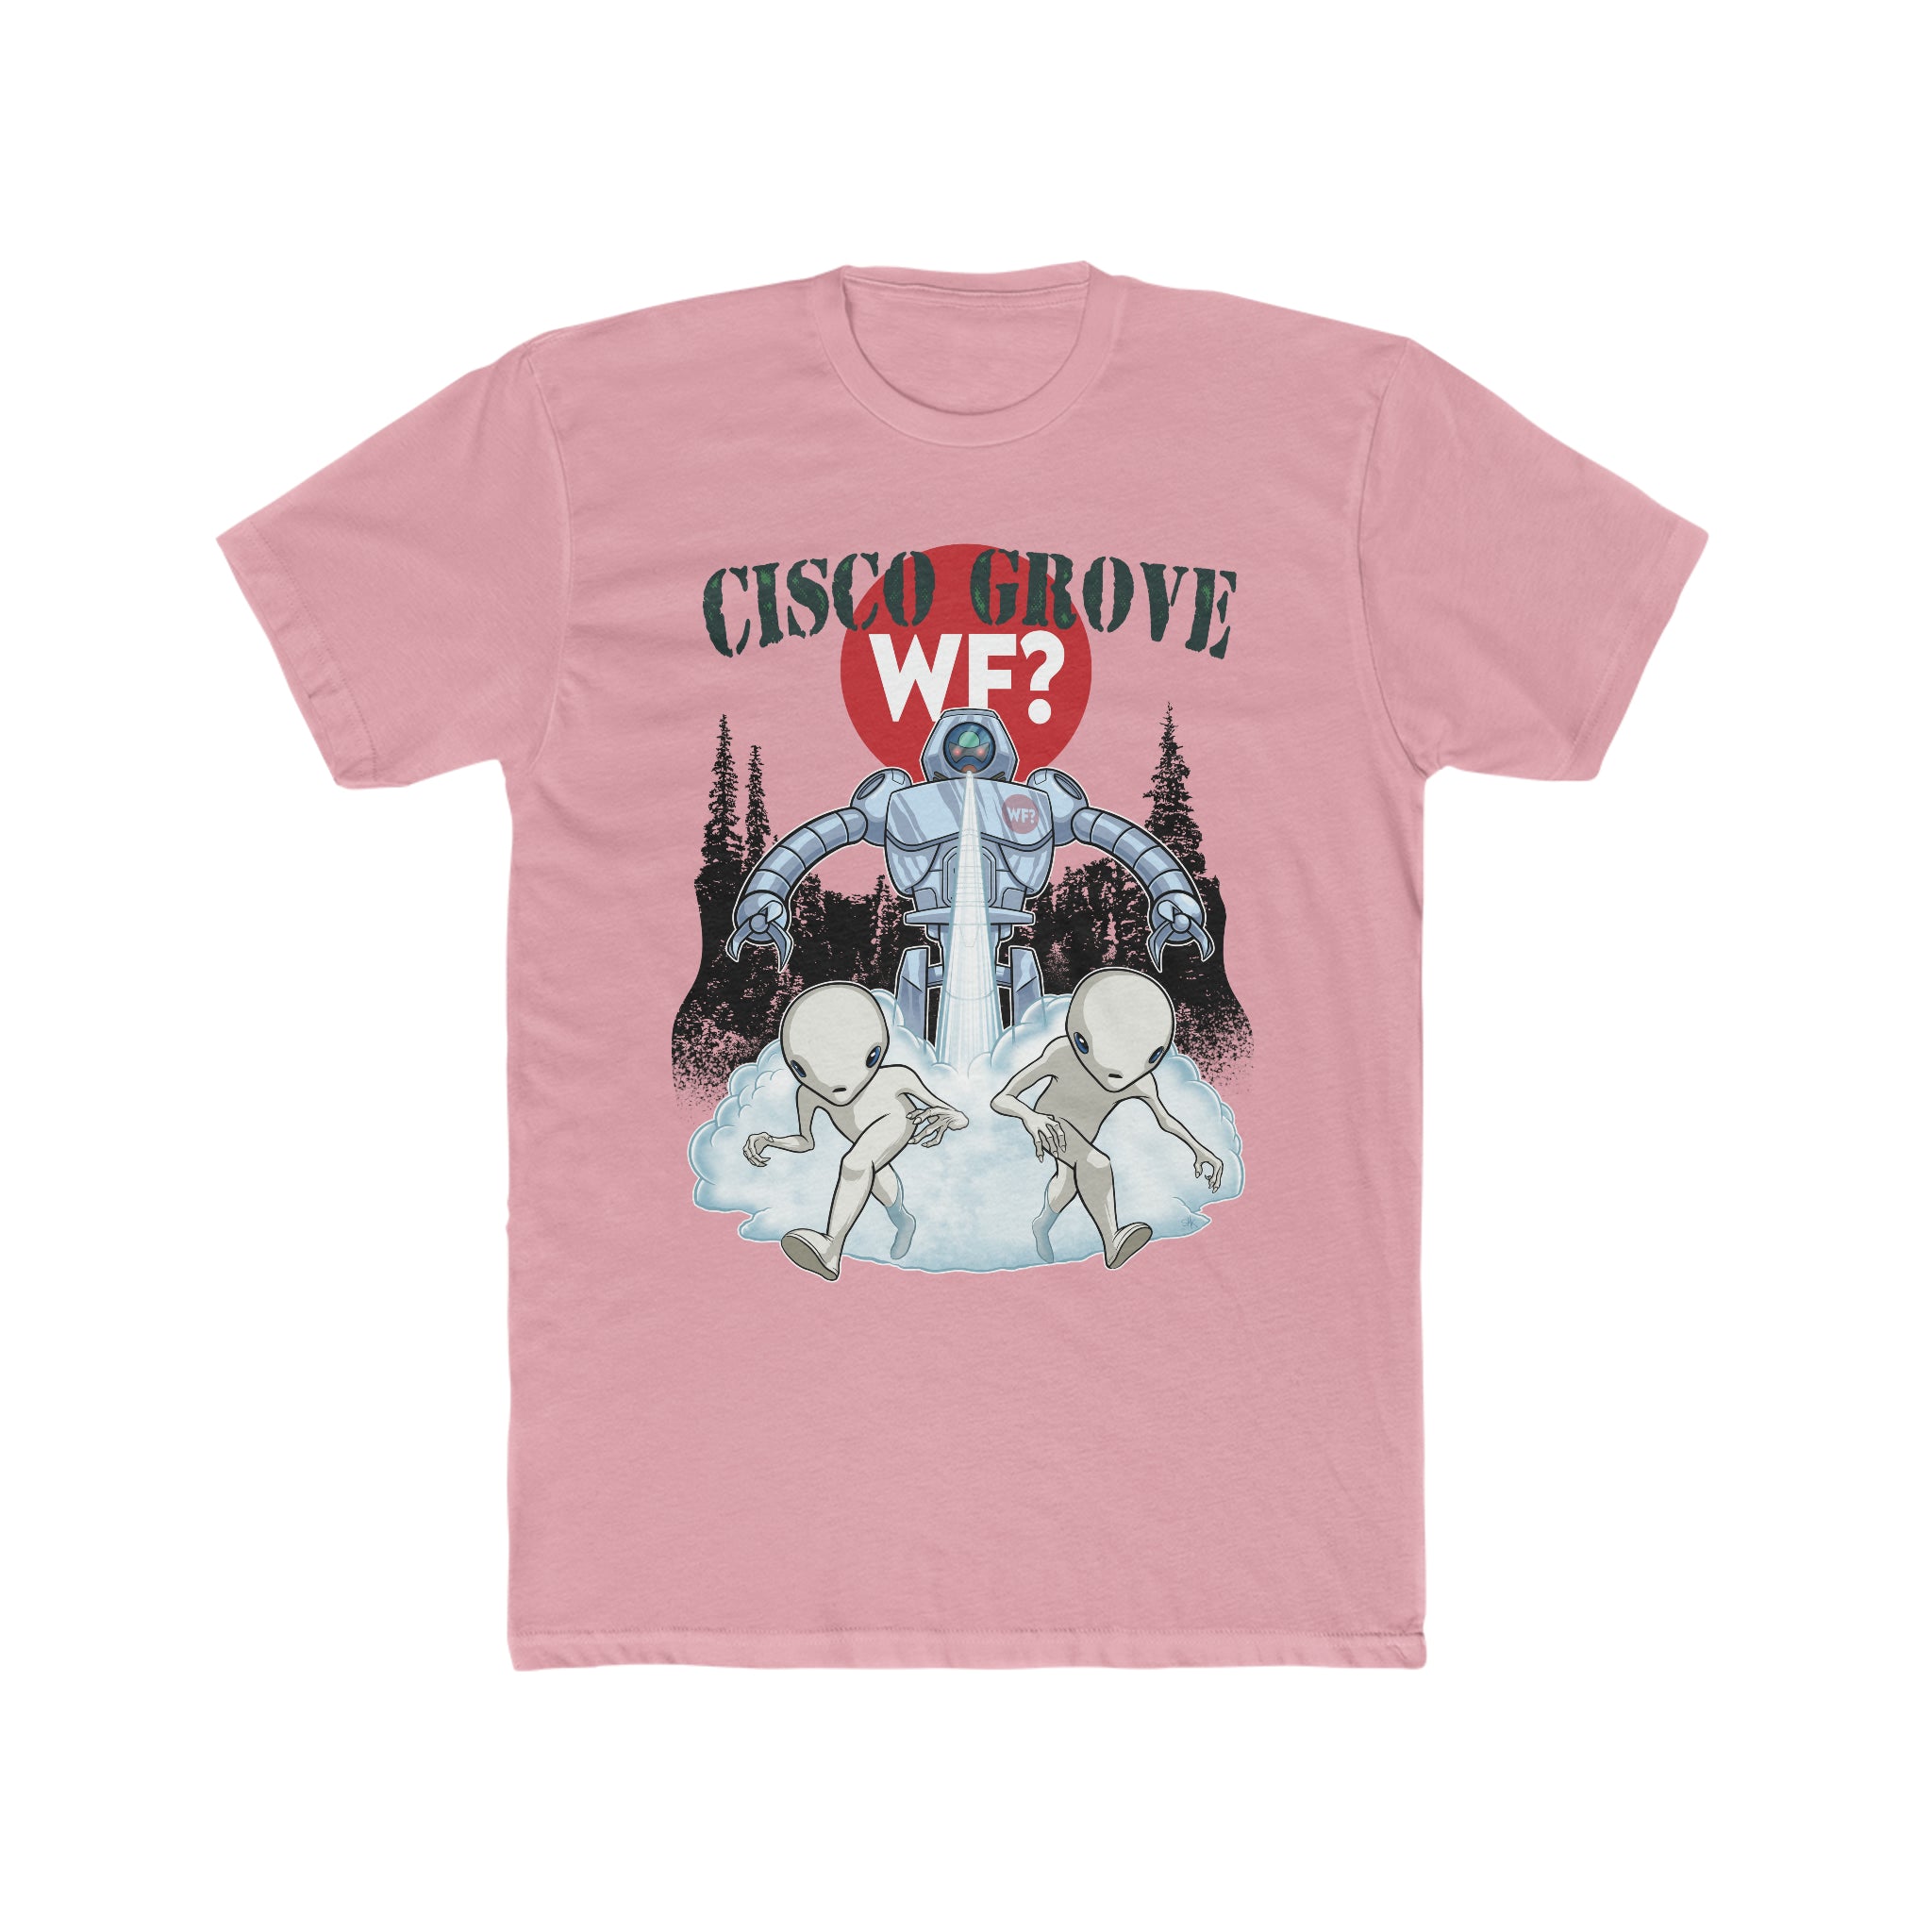 Buy solid-light-pink 12/7 Cisco Grove Limited Crew T-Shirt